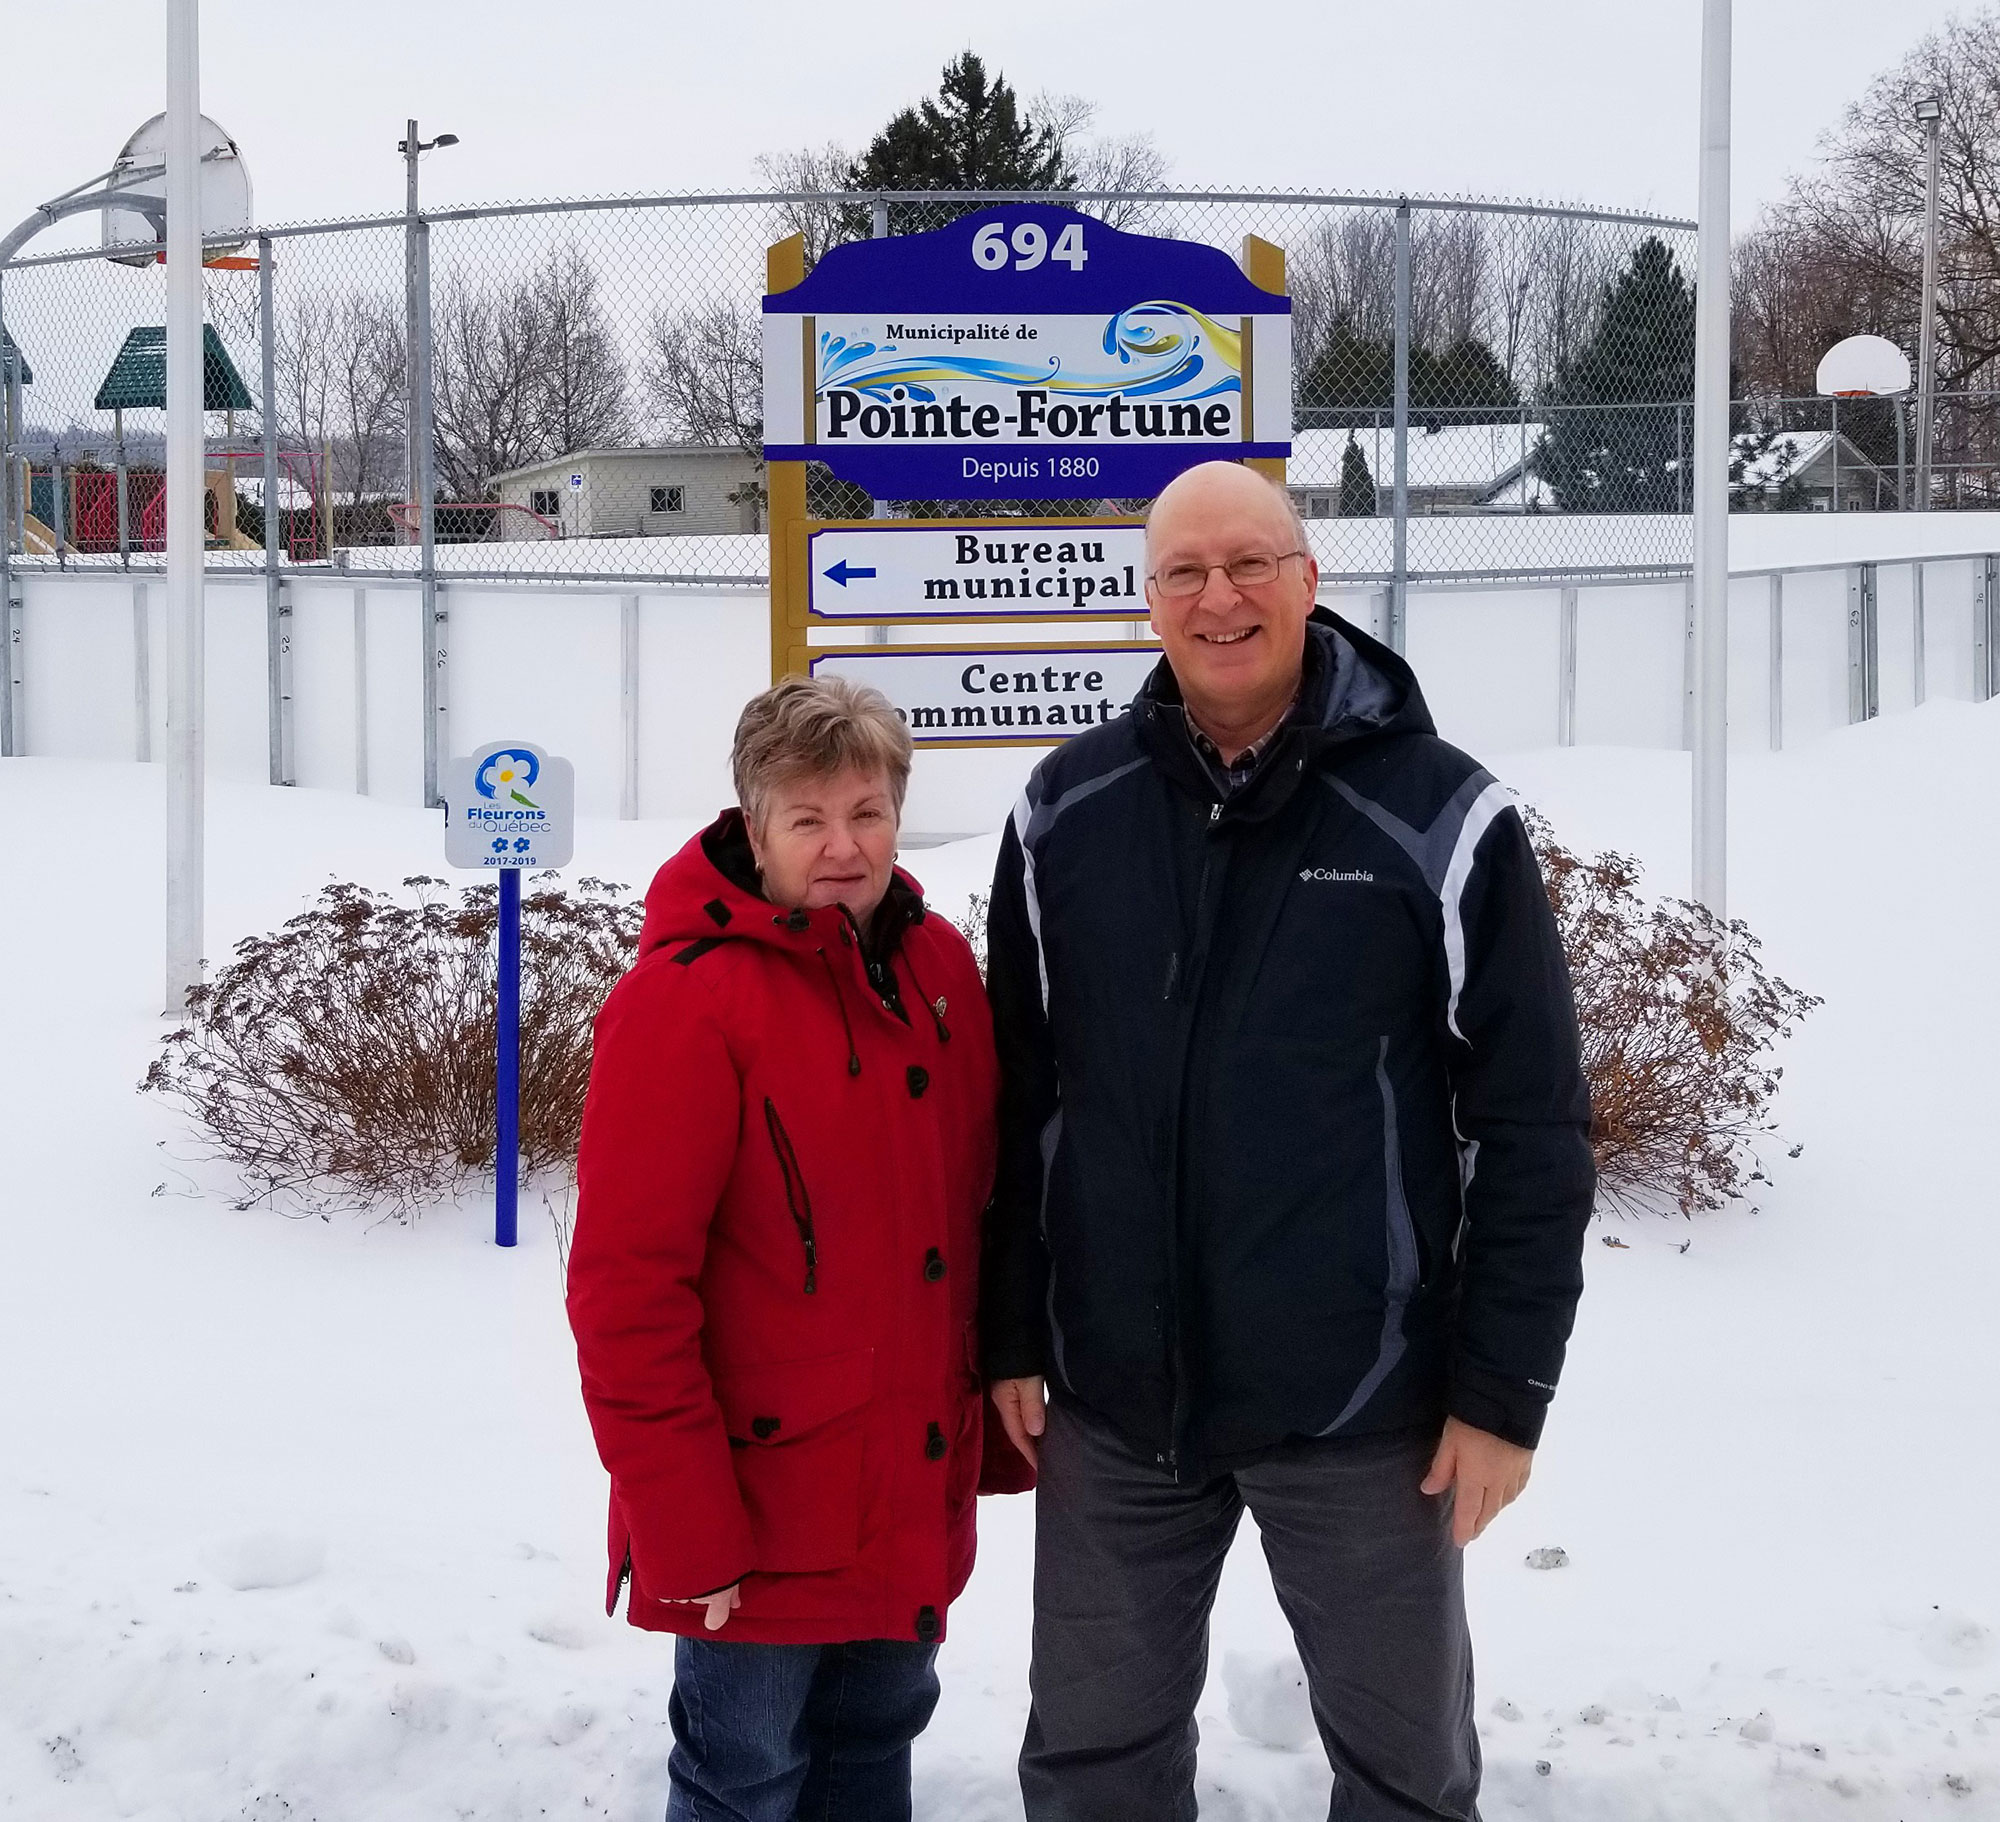 A man and woman stand in front of the Pointe-Fortune municipal sign and outdoor rink.